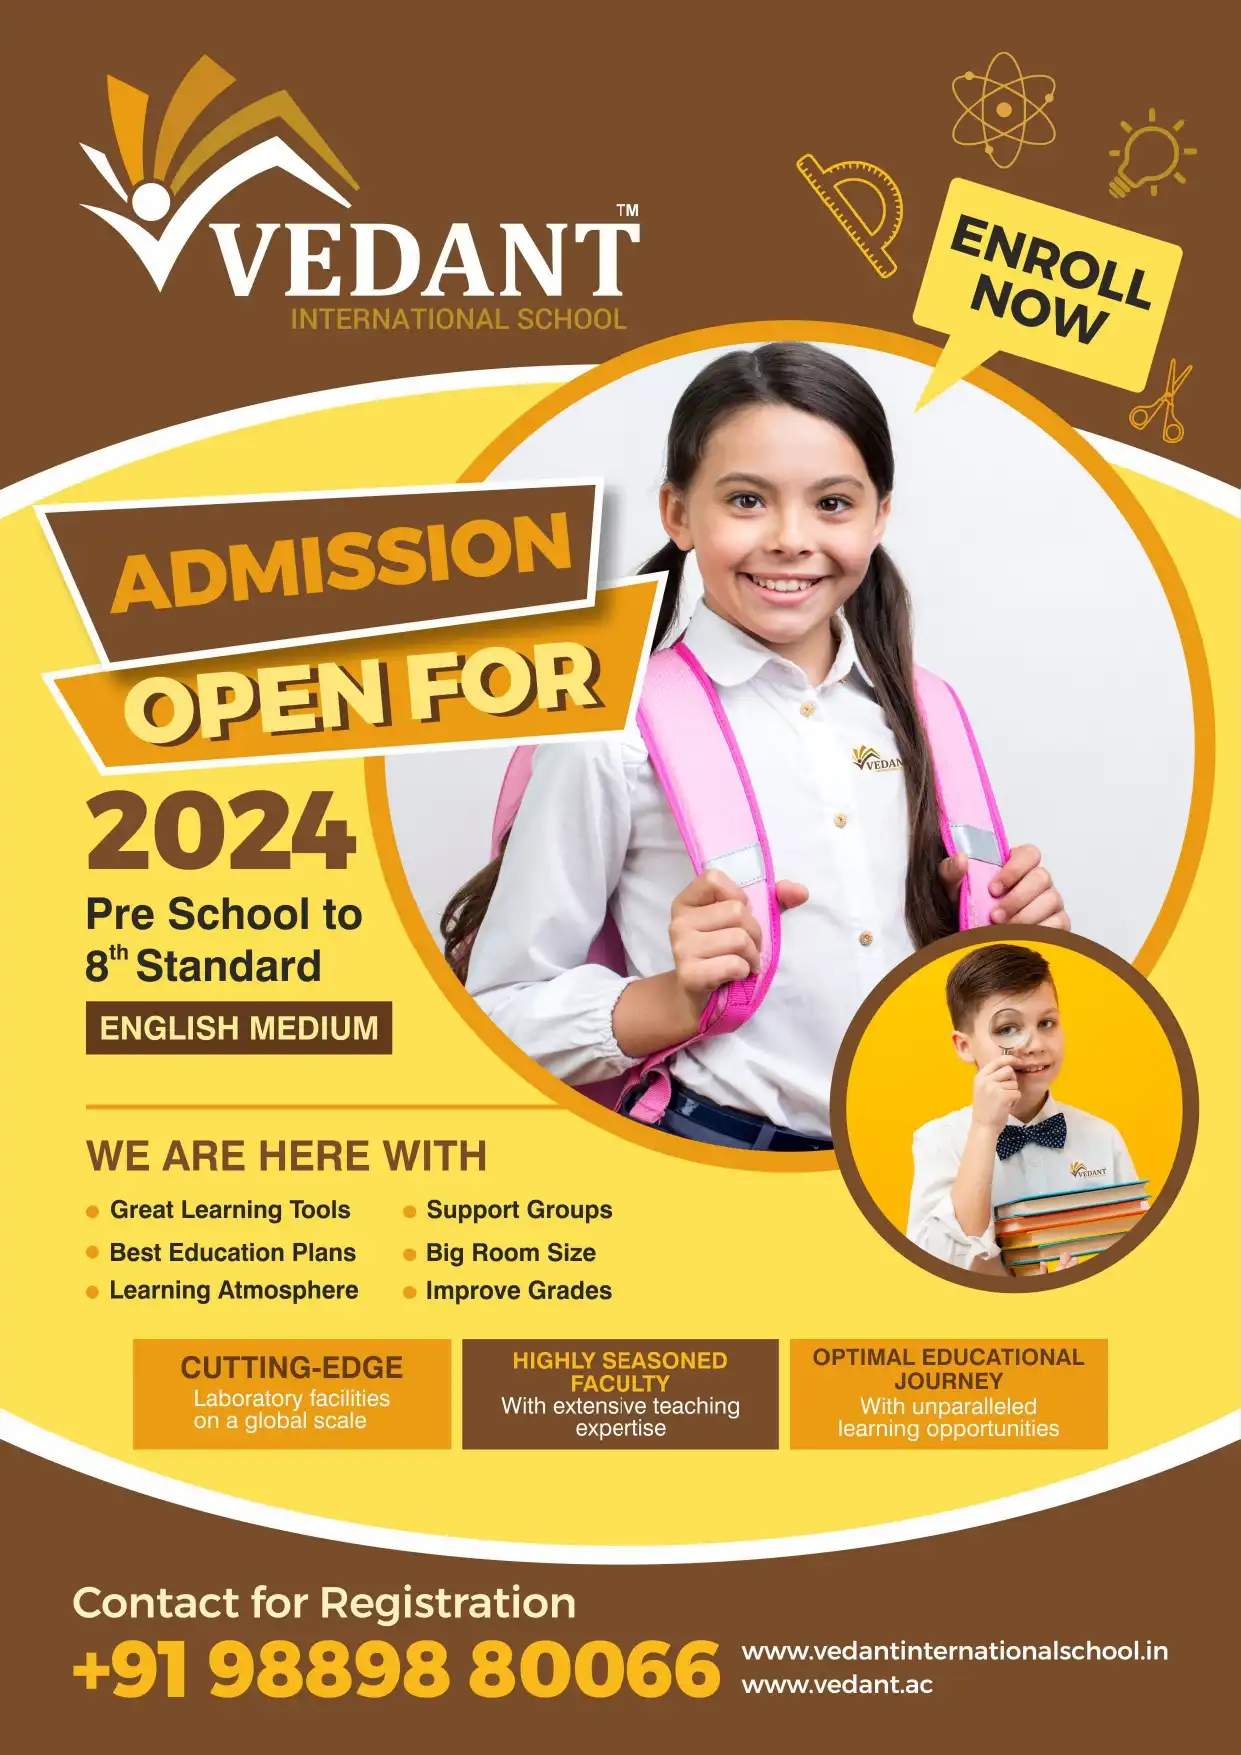 Admission Open for 2024